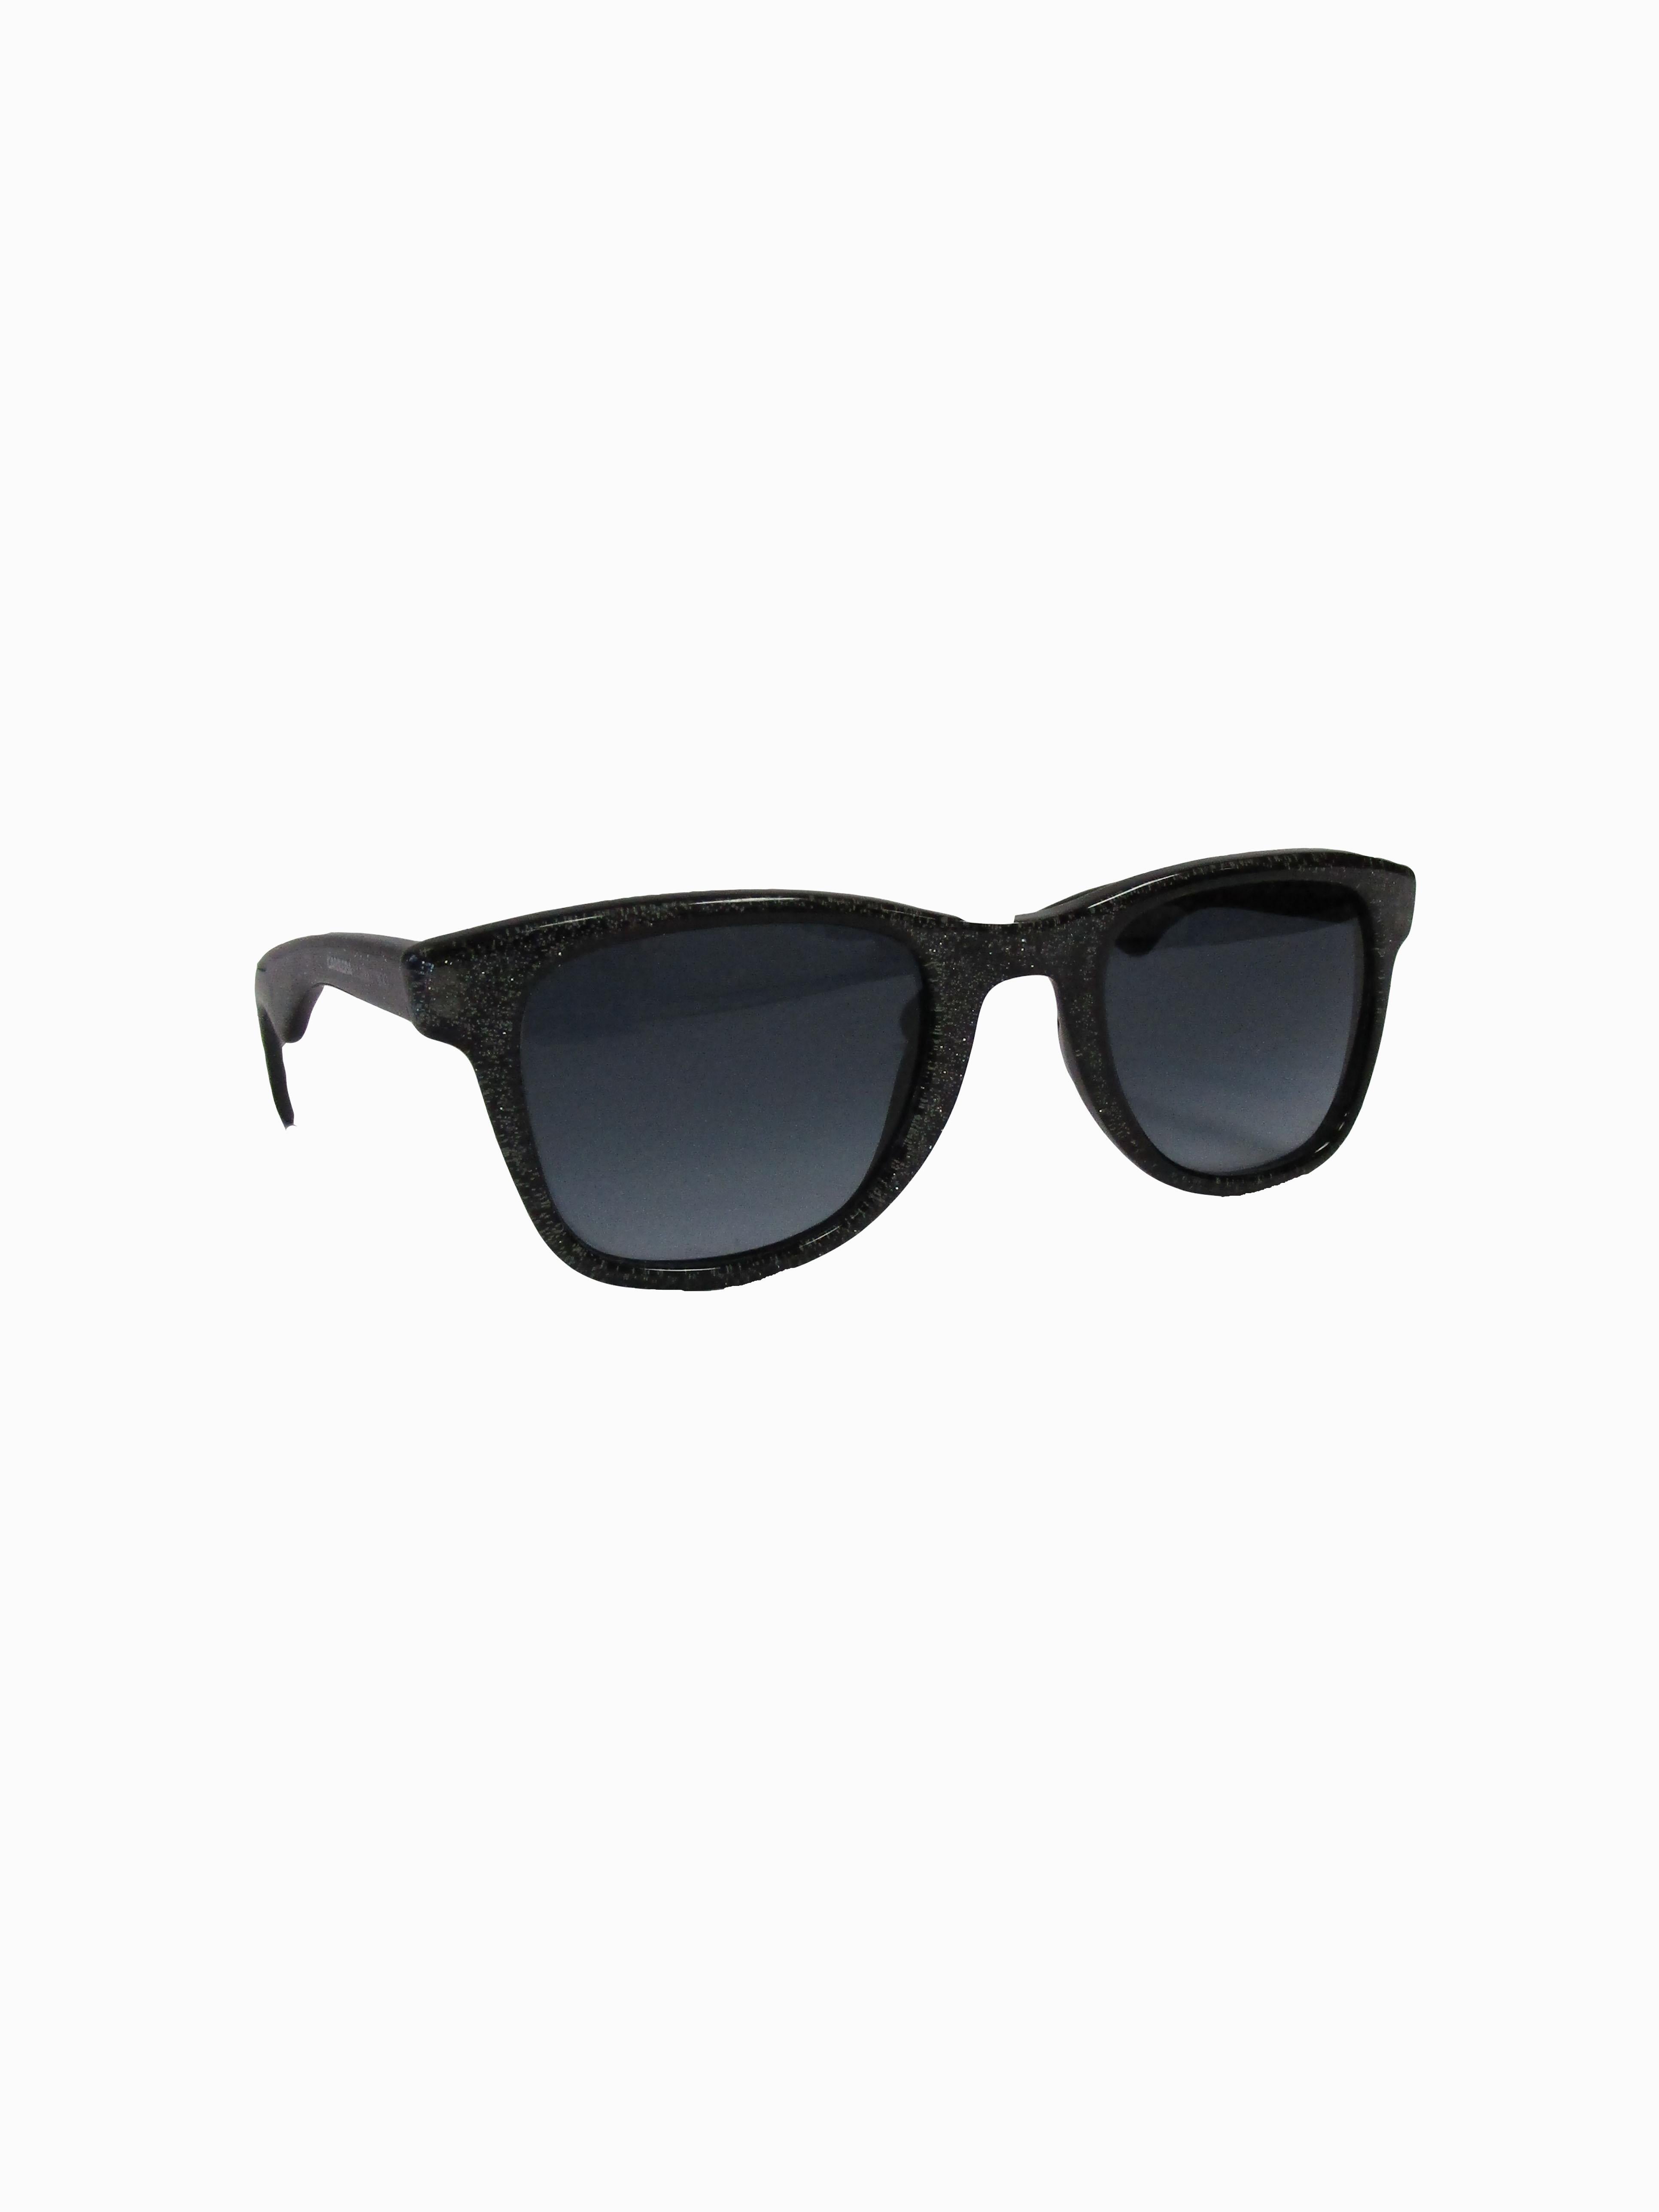 
Clean and chic black sunglasses from Jimmy Choo for Carrera!
They feature a contemporary style optyl frame with sparkles and dark grey lens.
These truly are your perfect everyday wear sunglasses.



